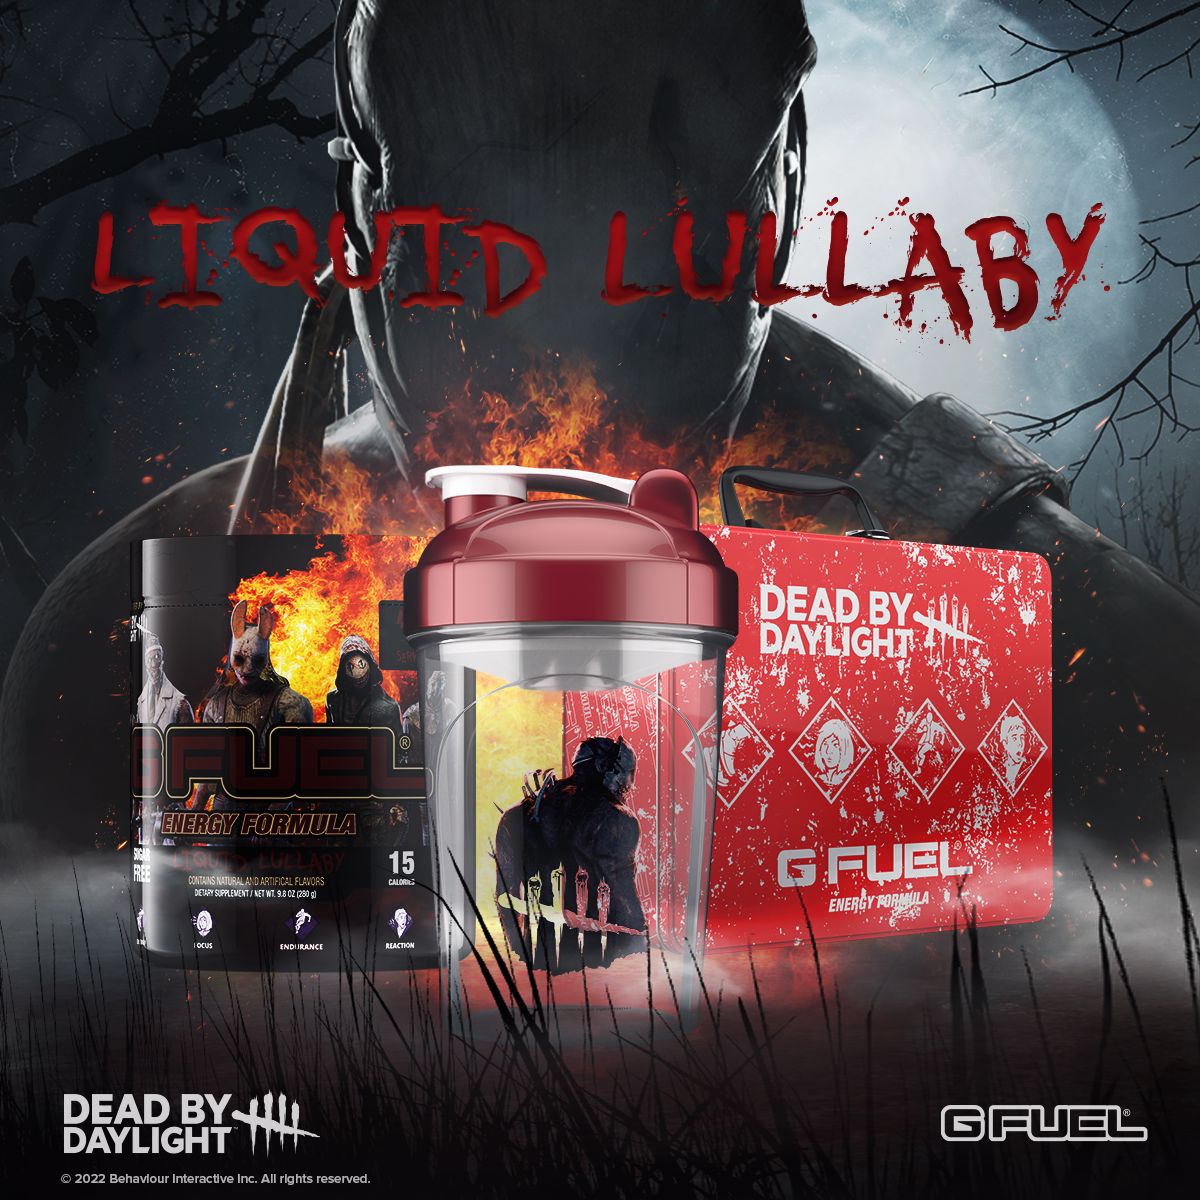 http://gfuel.com/cdn/shop/articles/g-fuel-and-dead-by-daylight-team-up-in-the-fog-for-a-brand-new-flavor-g-fuel-liquid-lullaby-473350.jpg?v=1664430223